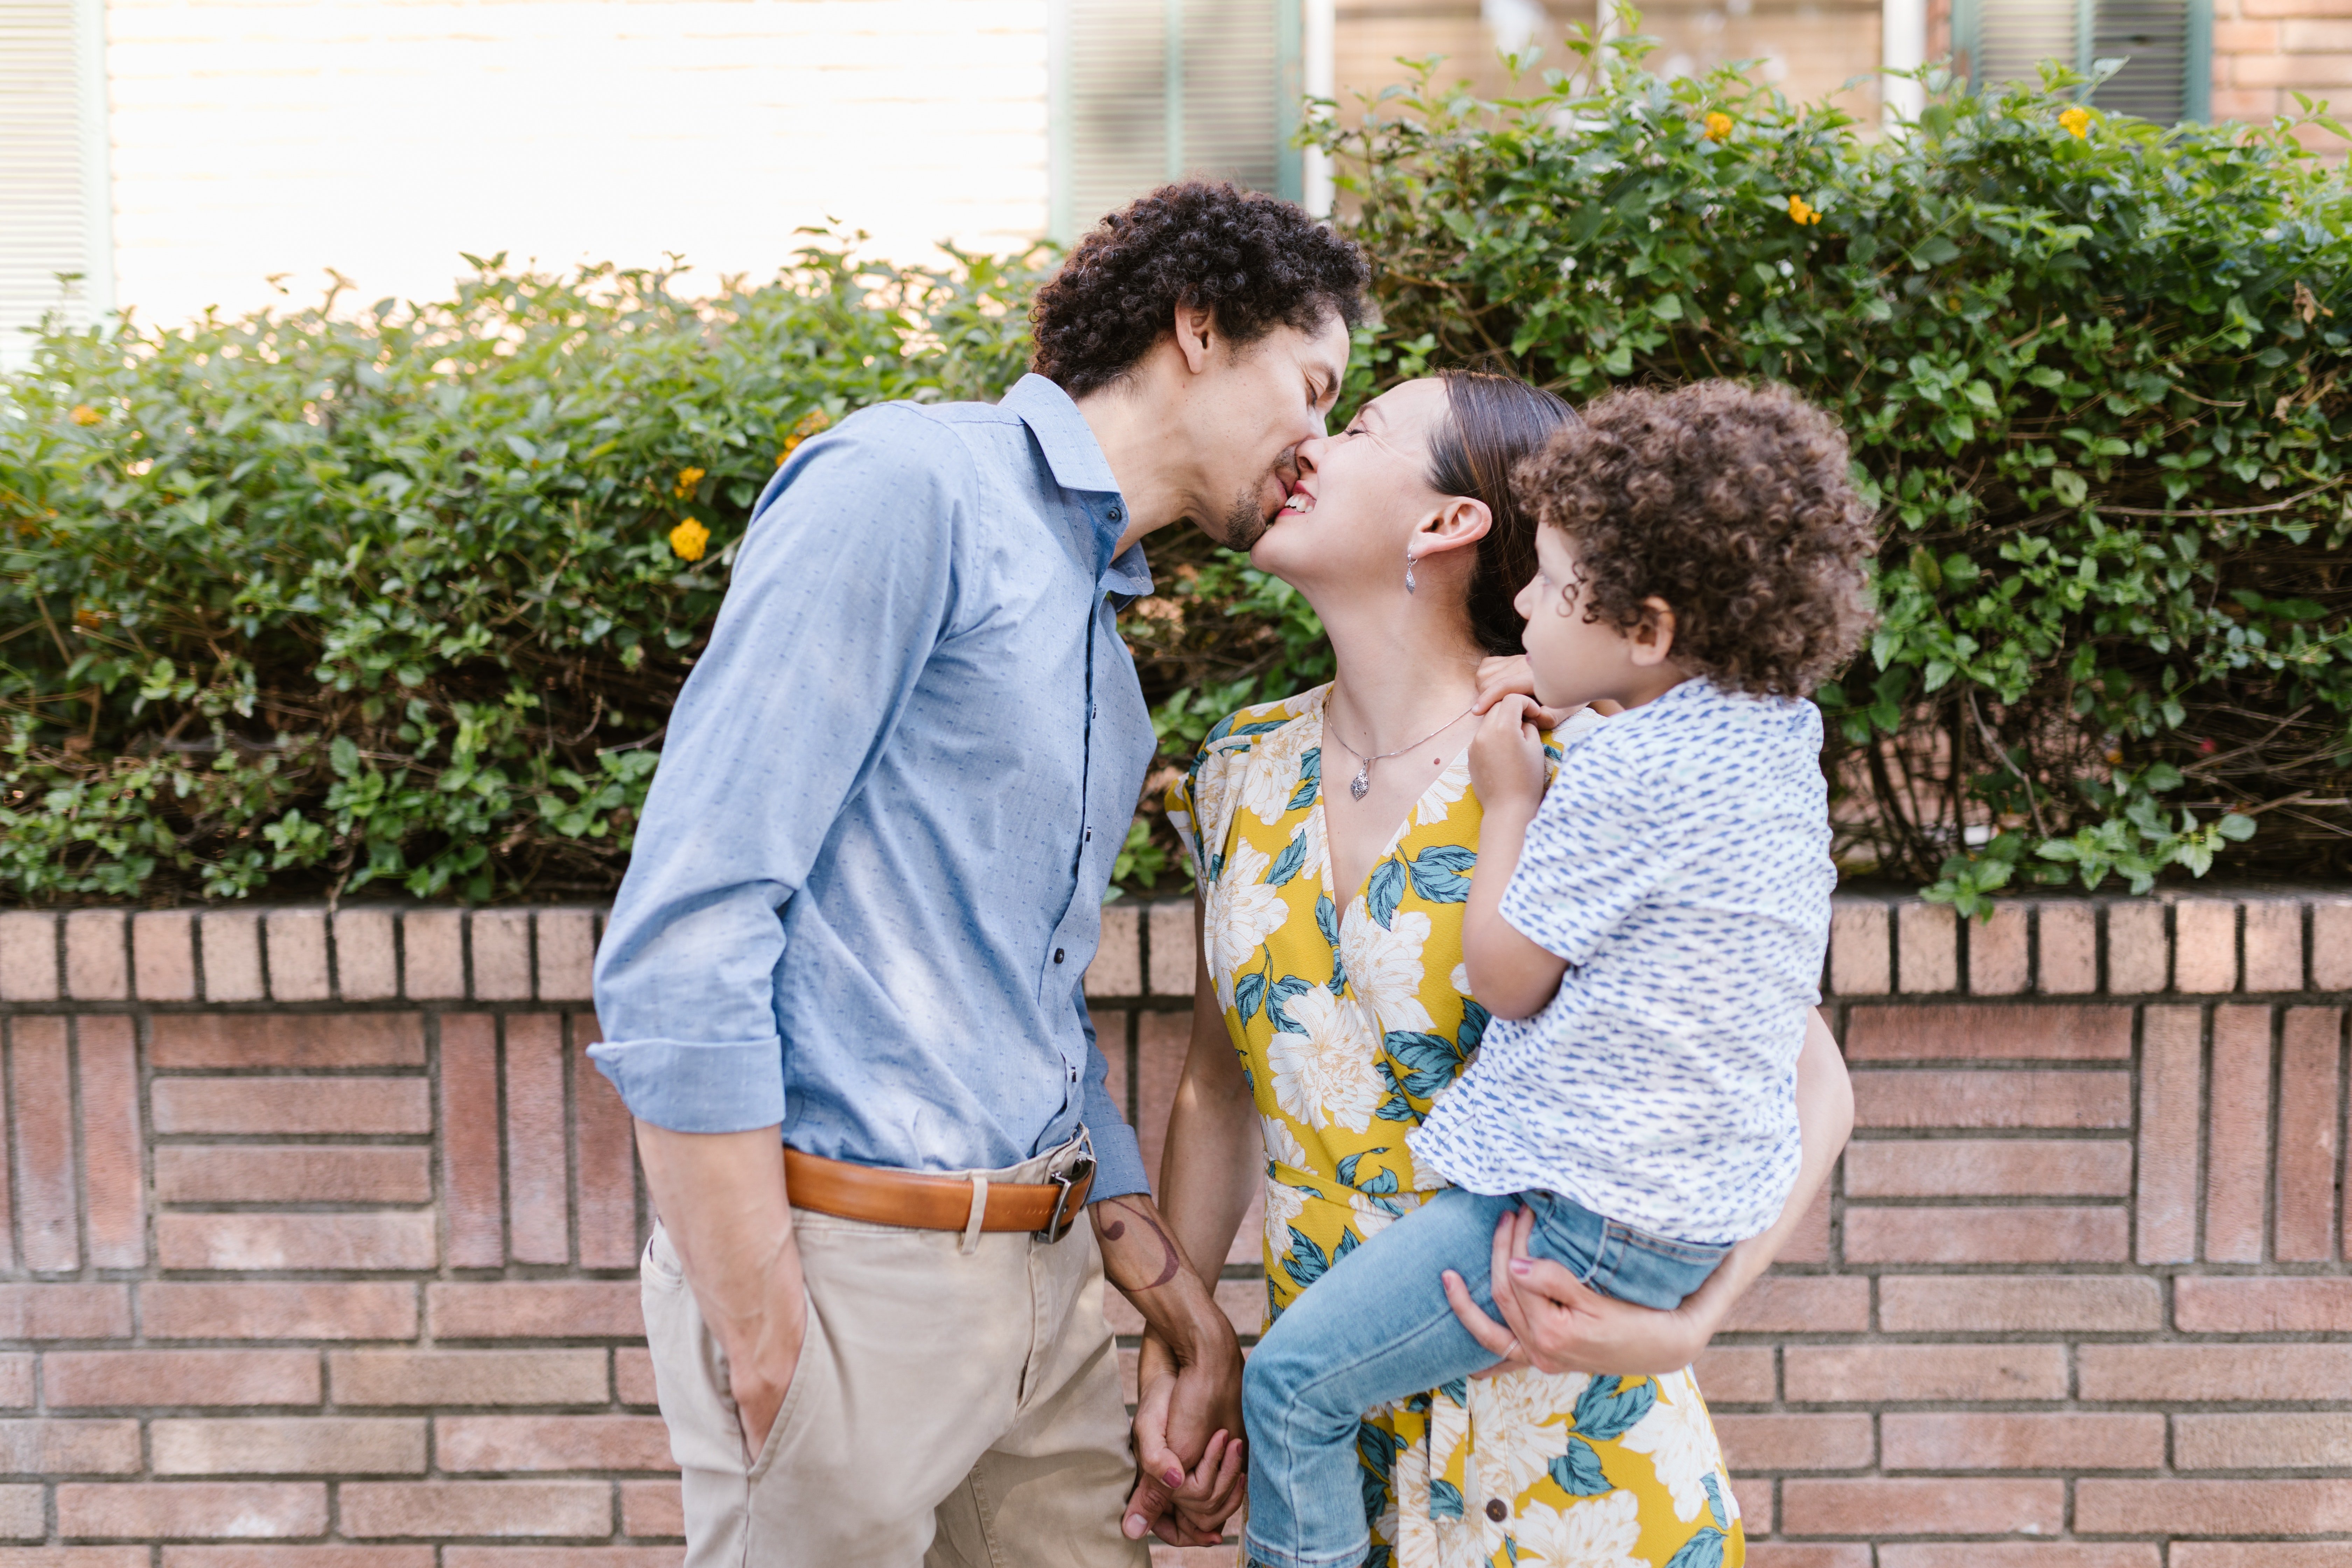 Toddler sees his mom kissing his uncle | Photo: Pexels